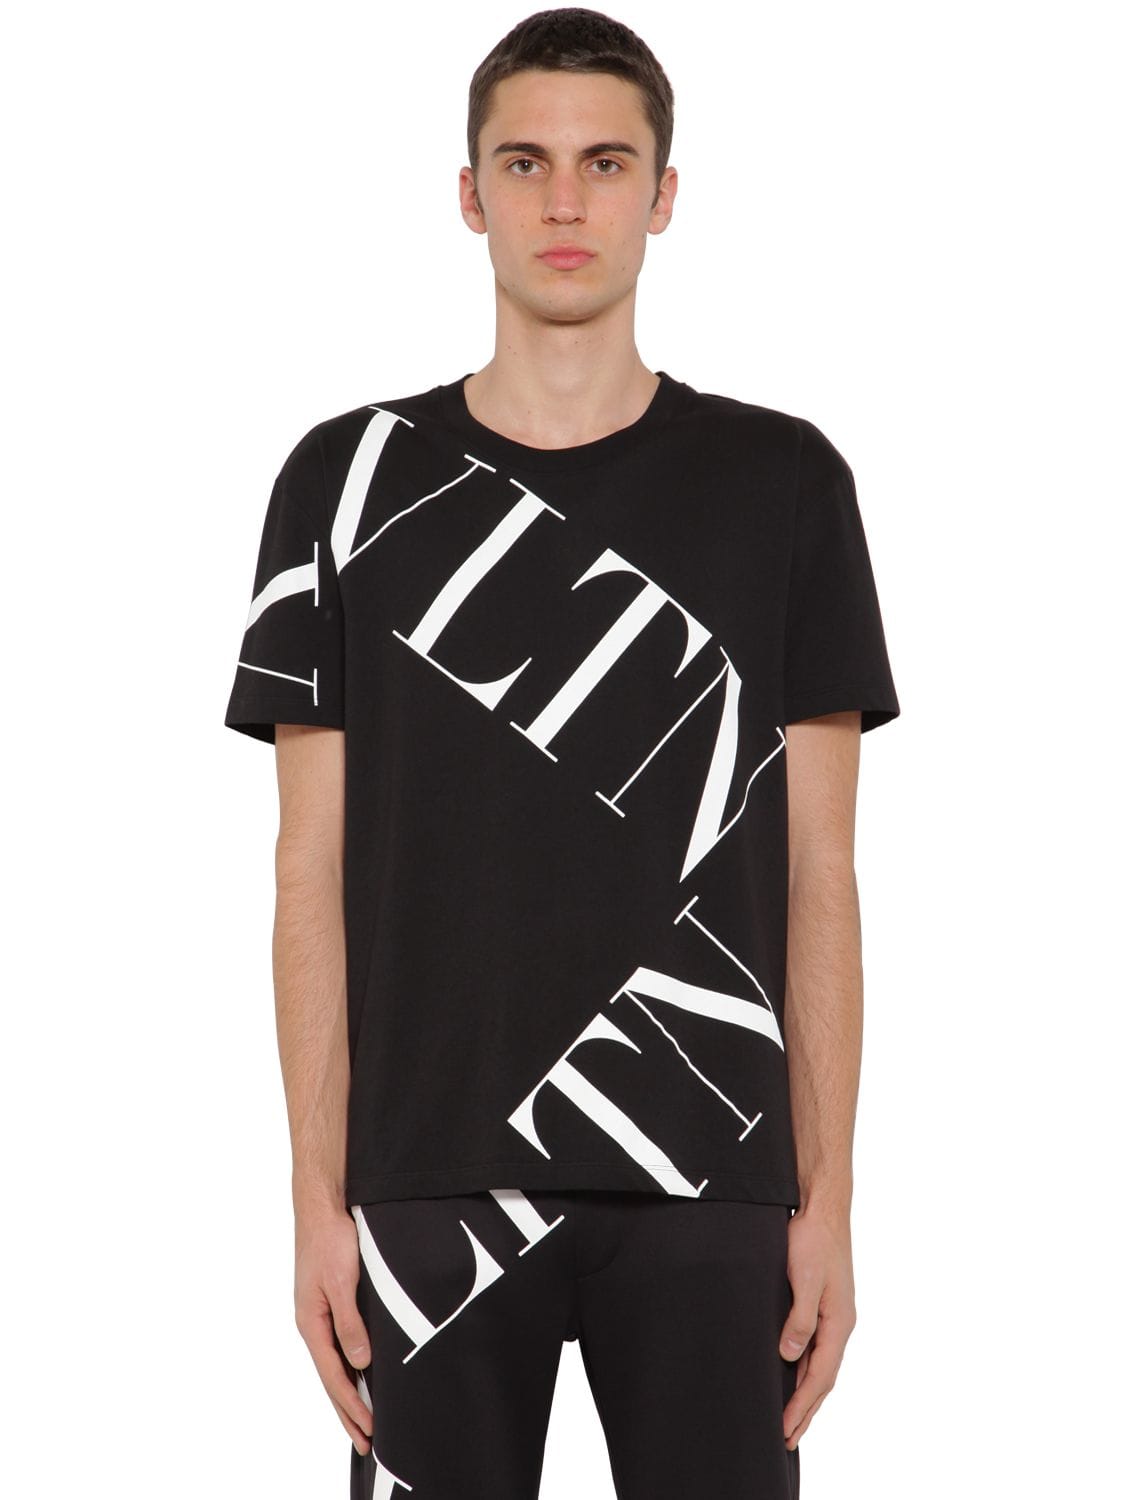 Vltn Greed Printed Cotton Jersey T-shirt | The Fashionisto